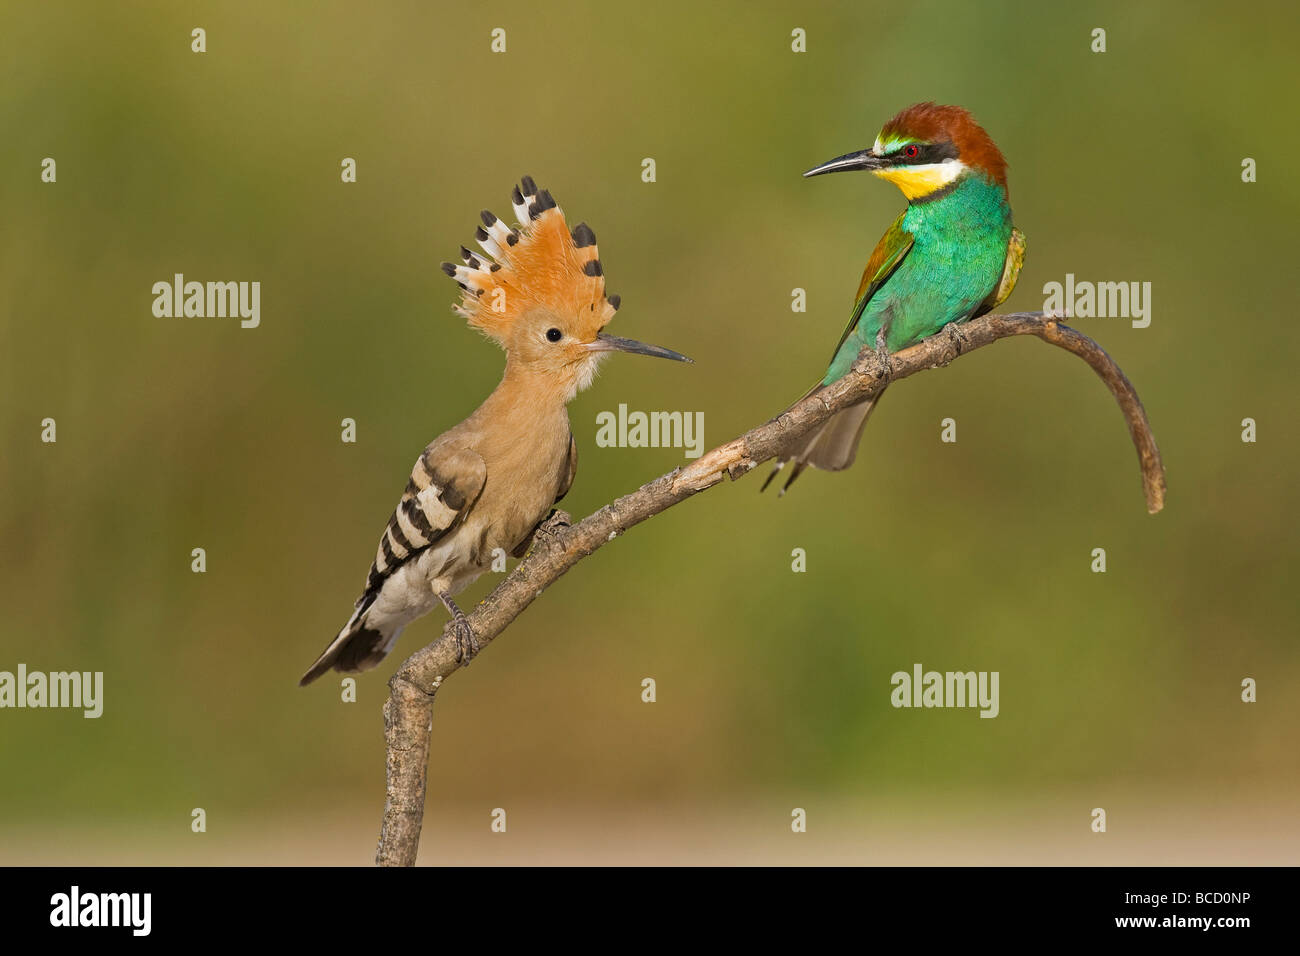 Hoopoe (Upupa epops) and Bee-eater (Merops apiaster) on perch; Spain Stock Photo